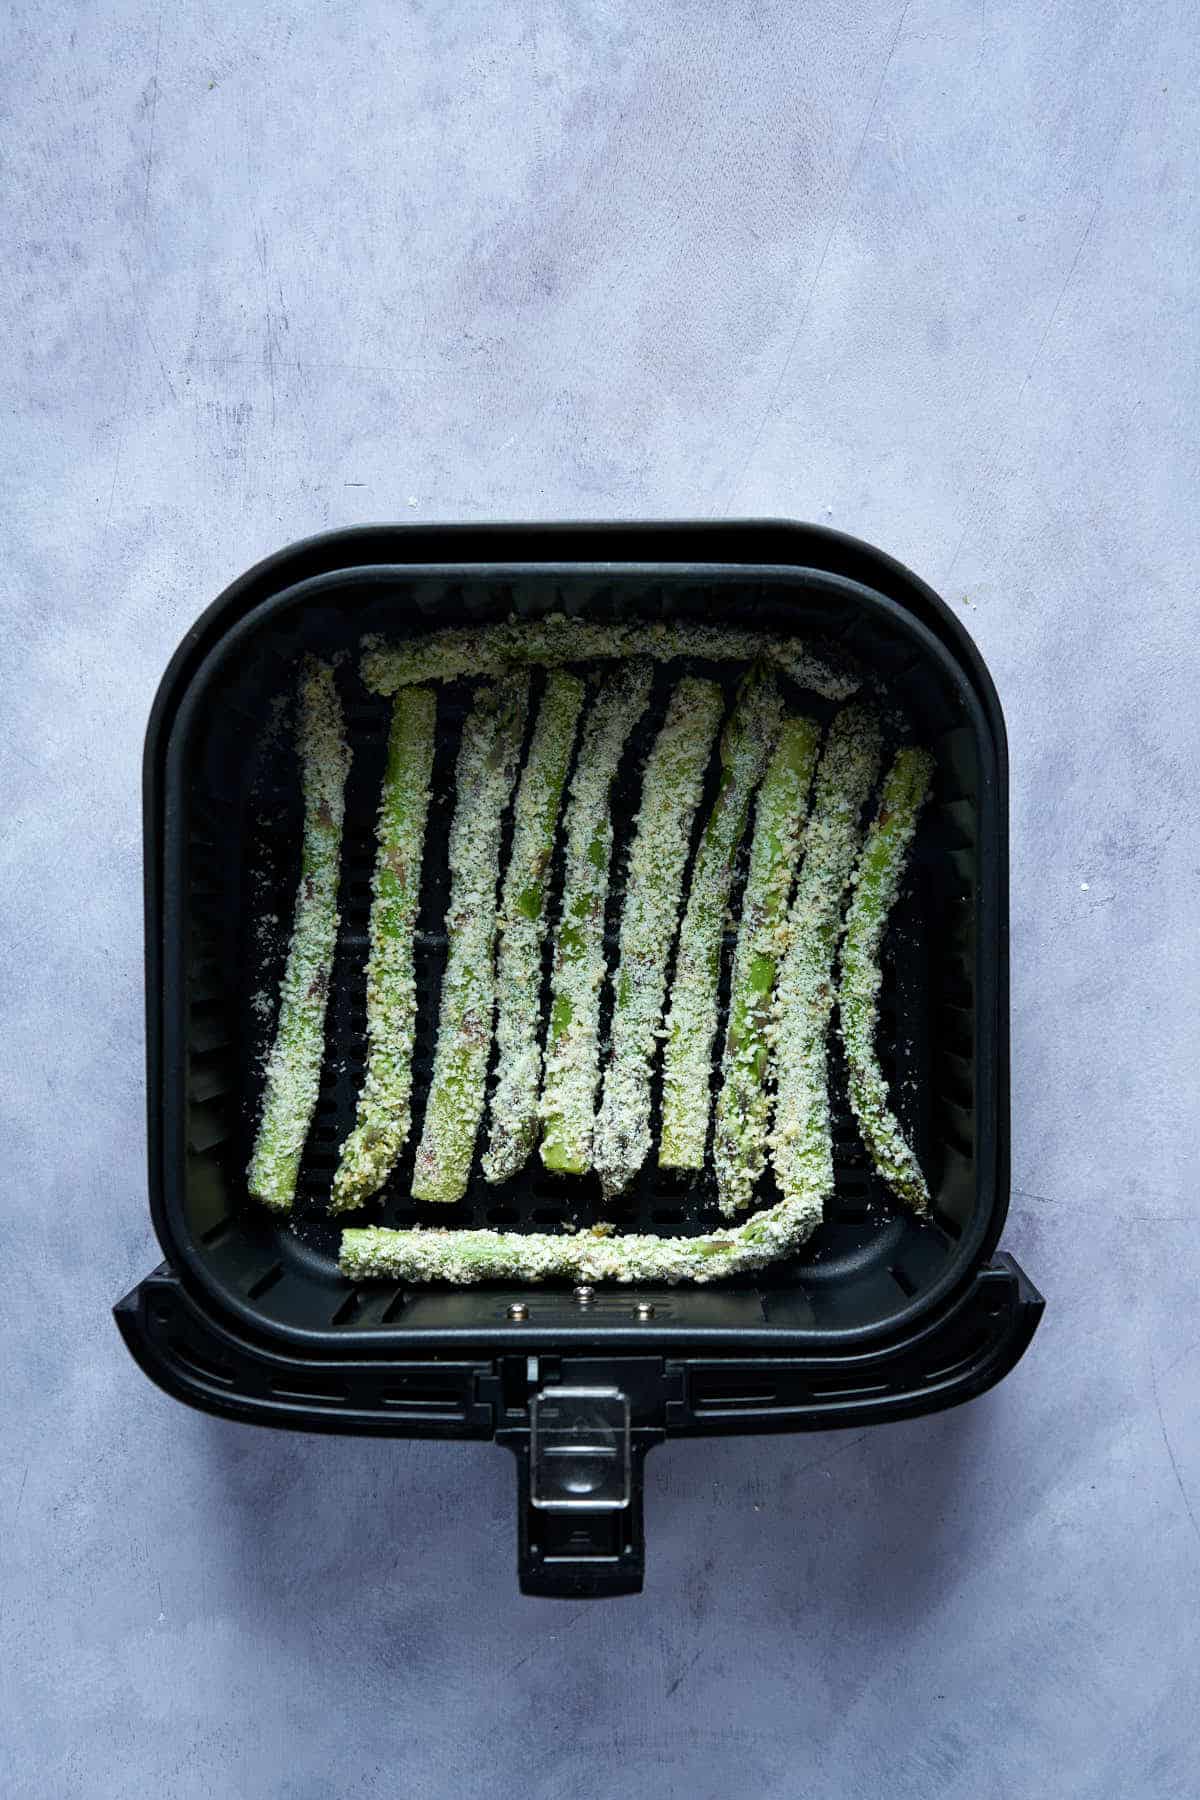 Asparagus fries in the air fryer basket before cooking.